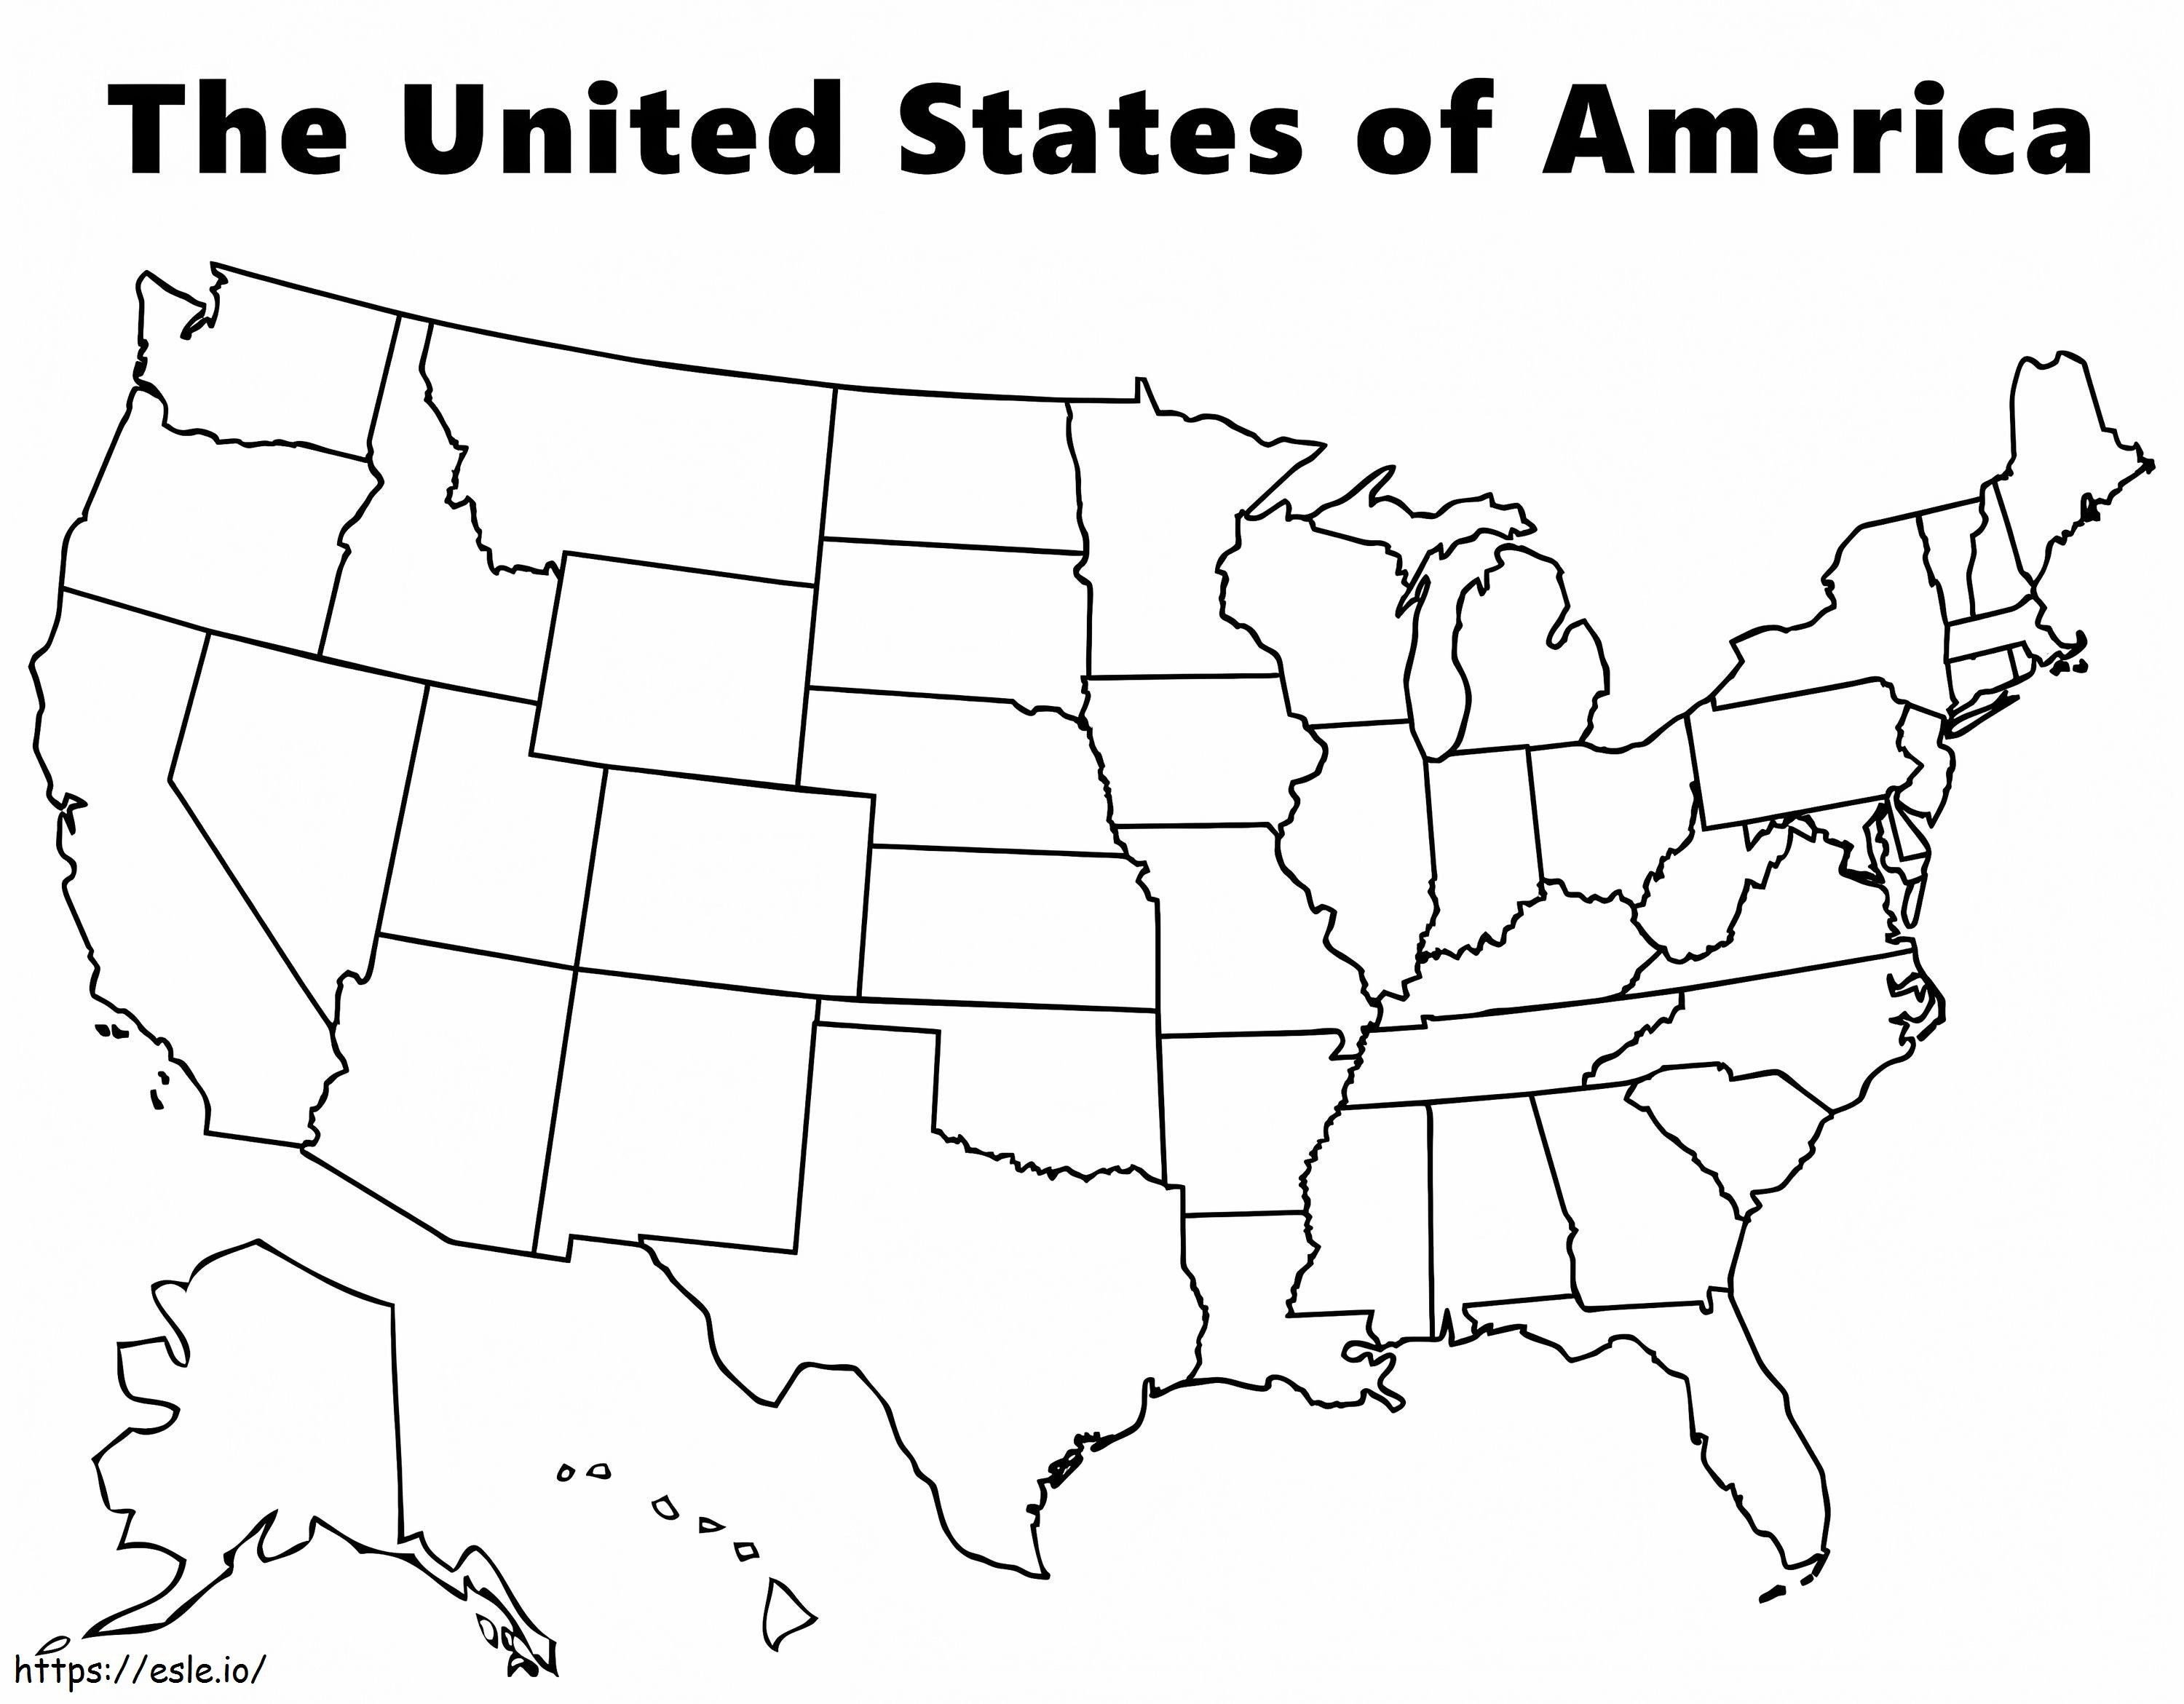 The United States Of America Map Coloring Page coloring page